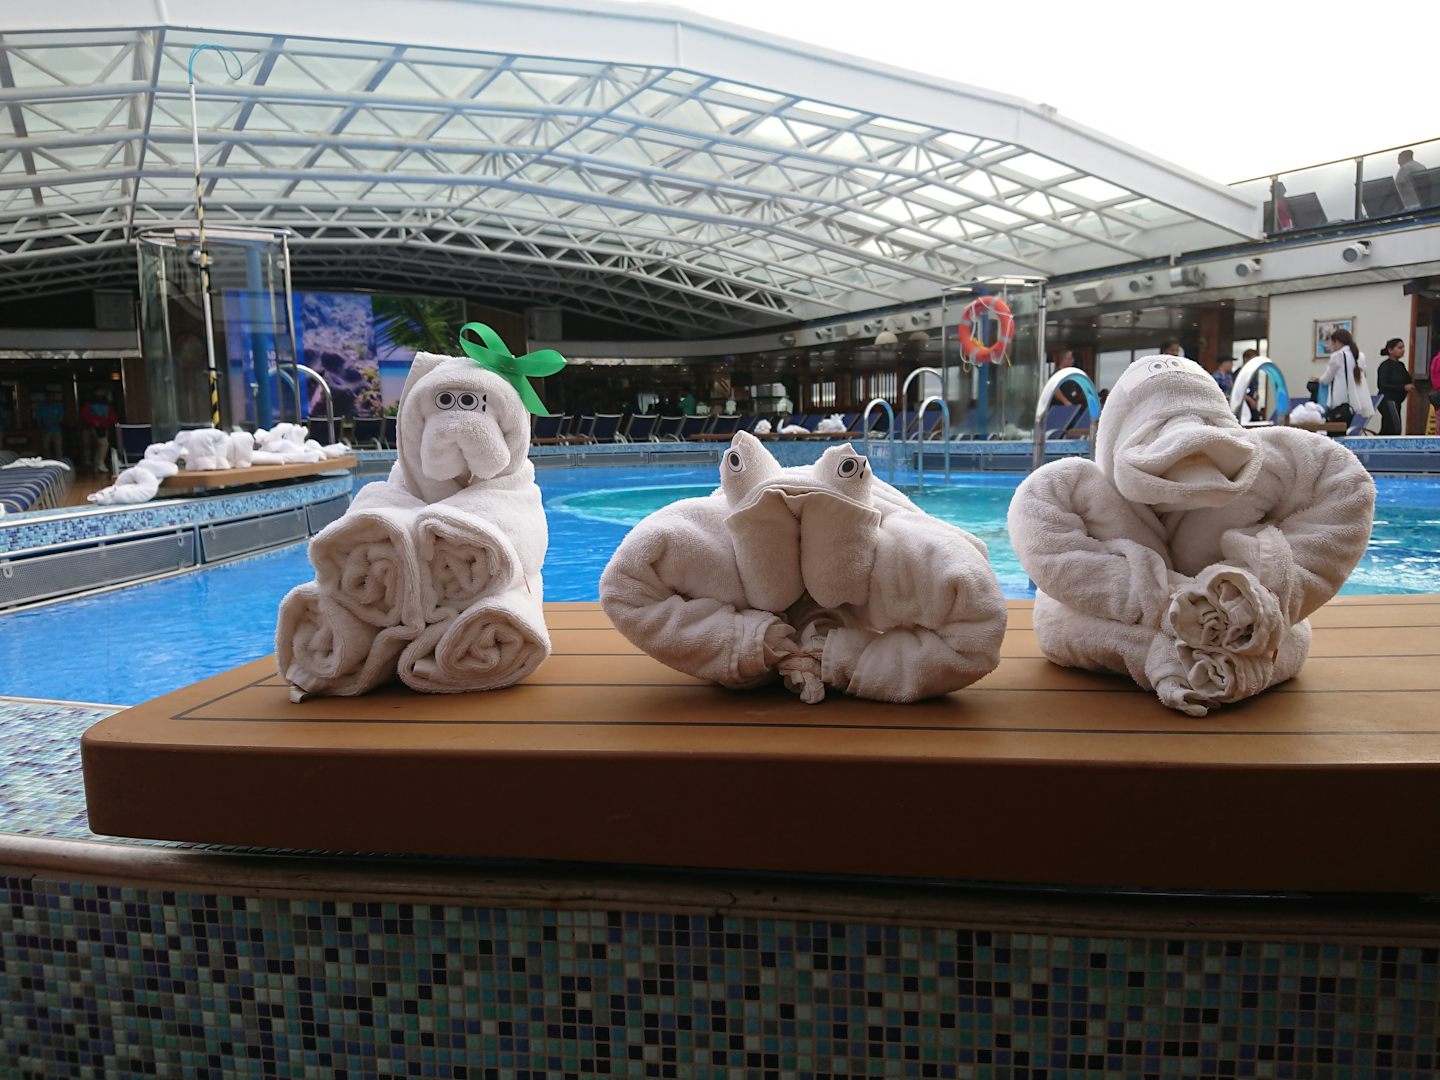 Towel animals at Dome Pool